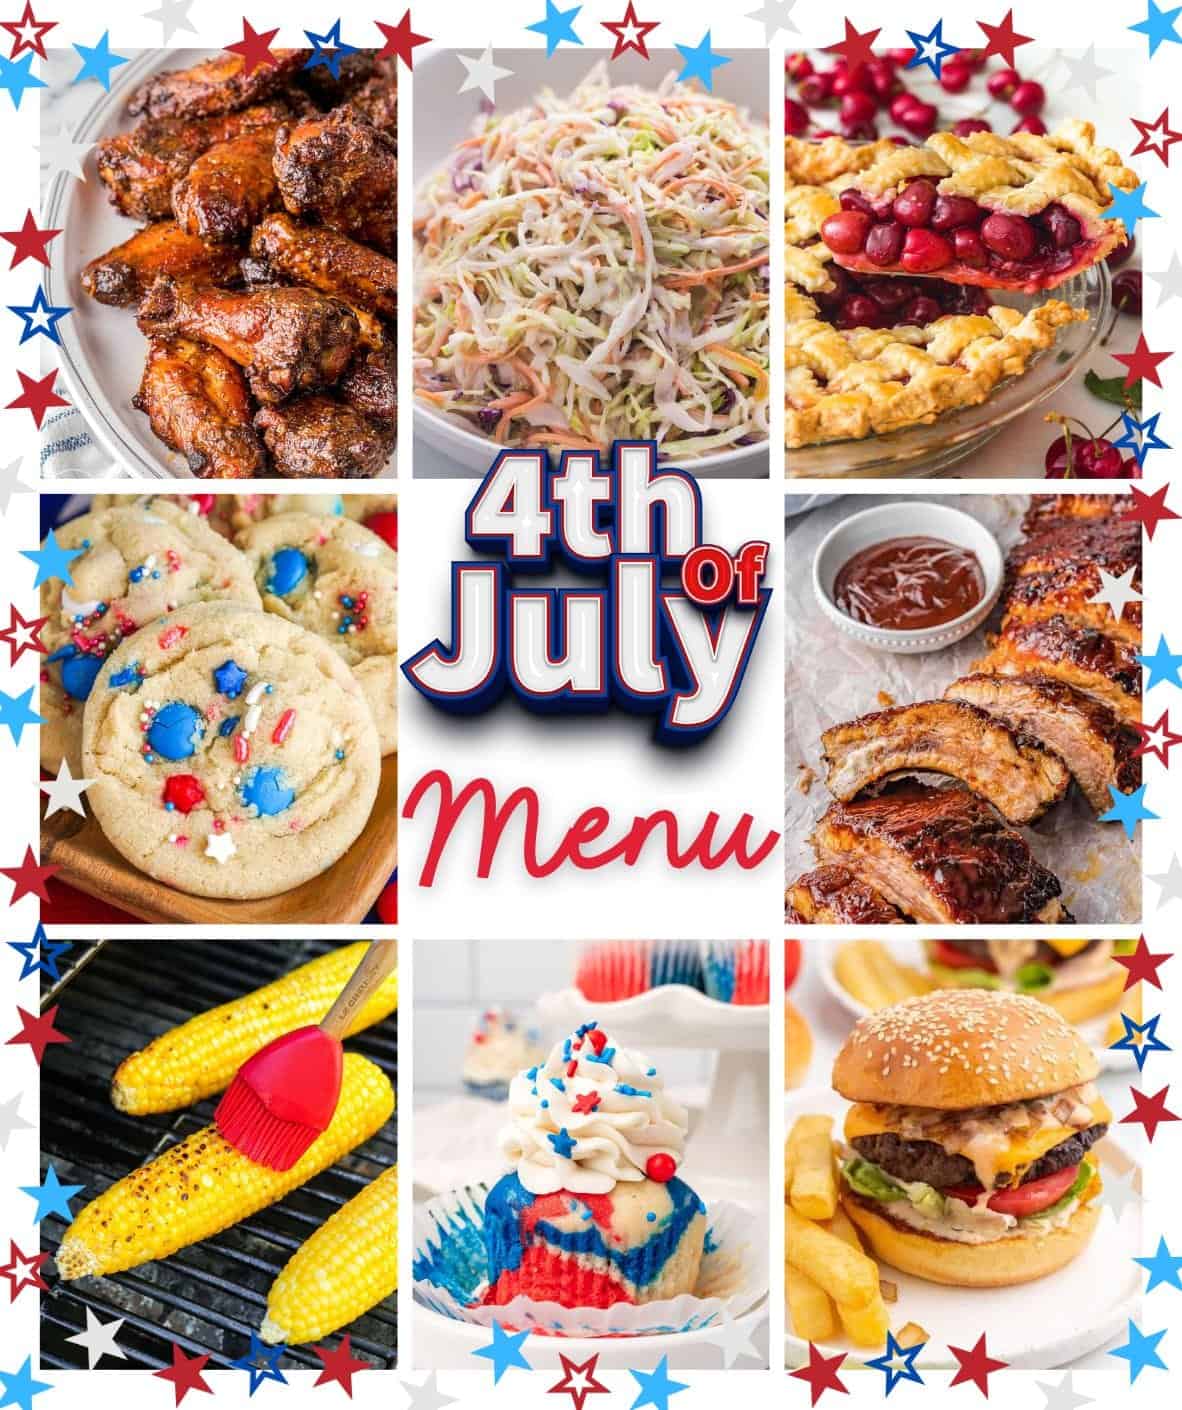 Collage of 9 images of 4th of july recipes, and overlay text that says "4th of july menu"